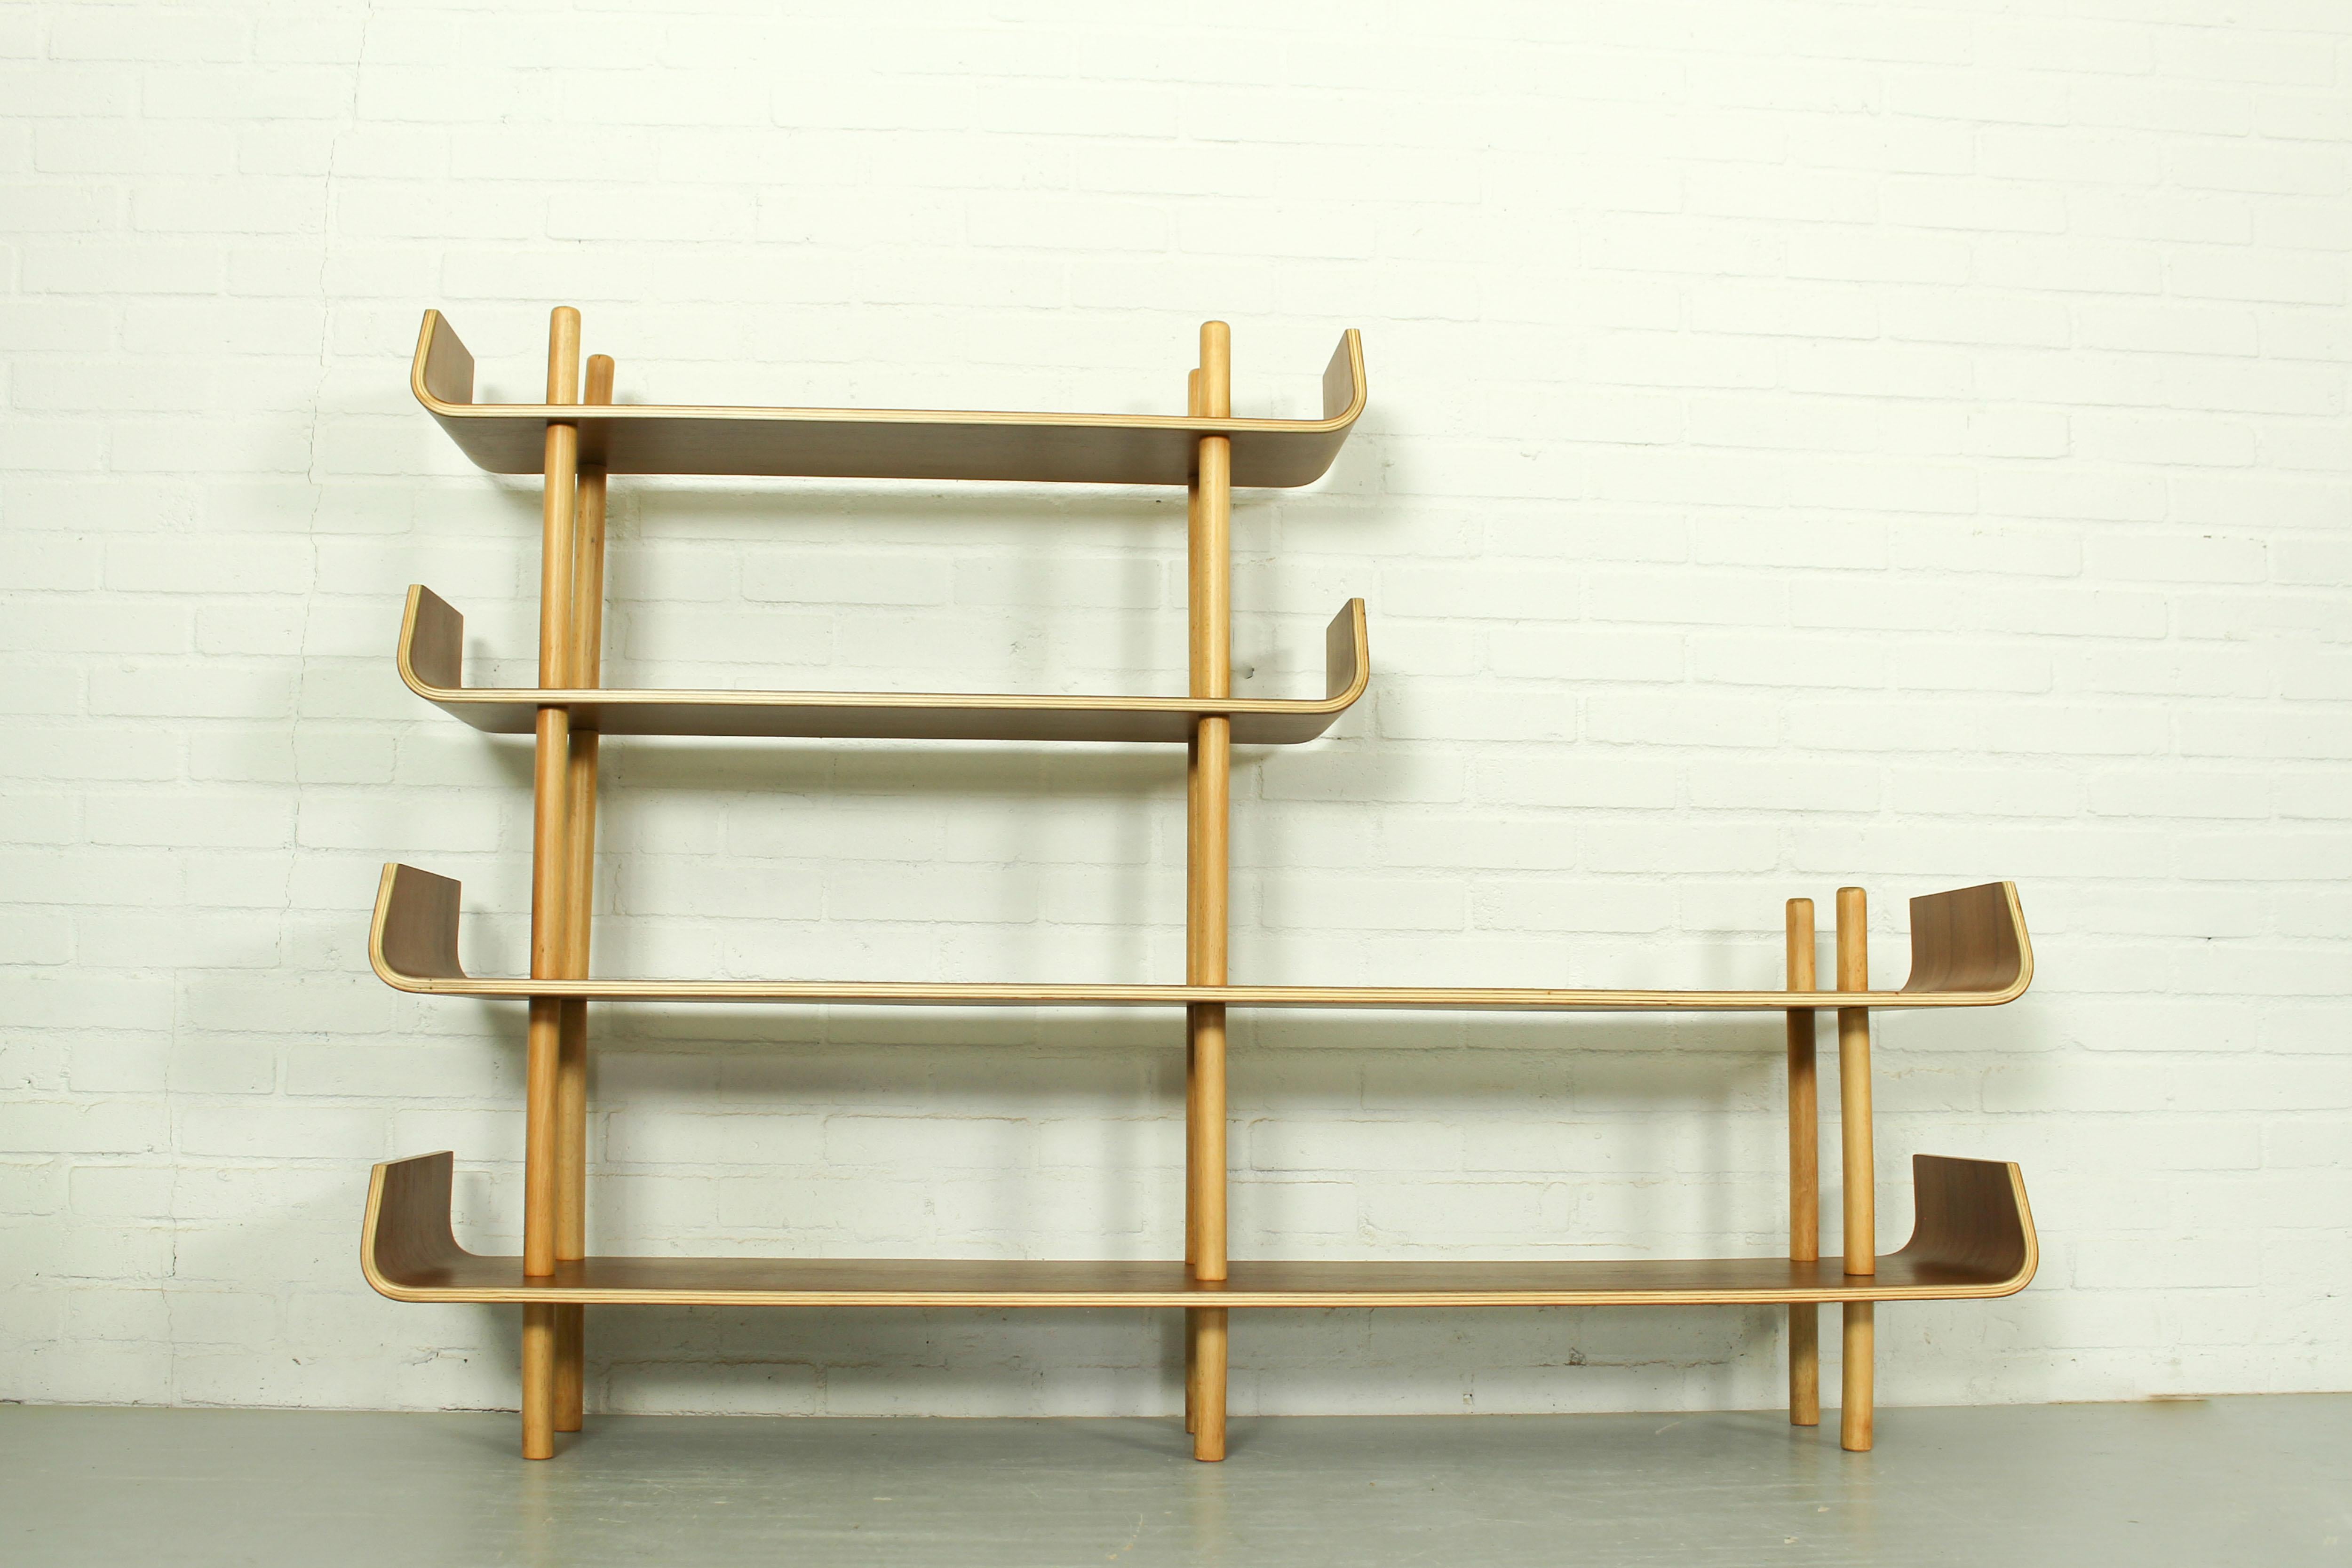 Bookshelf Model 545 by Willem Lutjens for Gouda den Boer, 1953. Made of teak plywood, timeless and organic design! The bentwood ends are typical for these bookshelves, they are connected by poles. The cabinet can be used as room divider or as wall